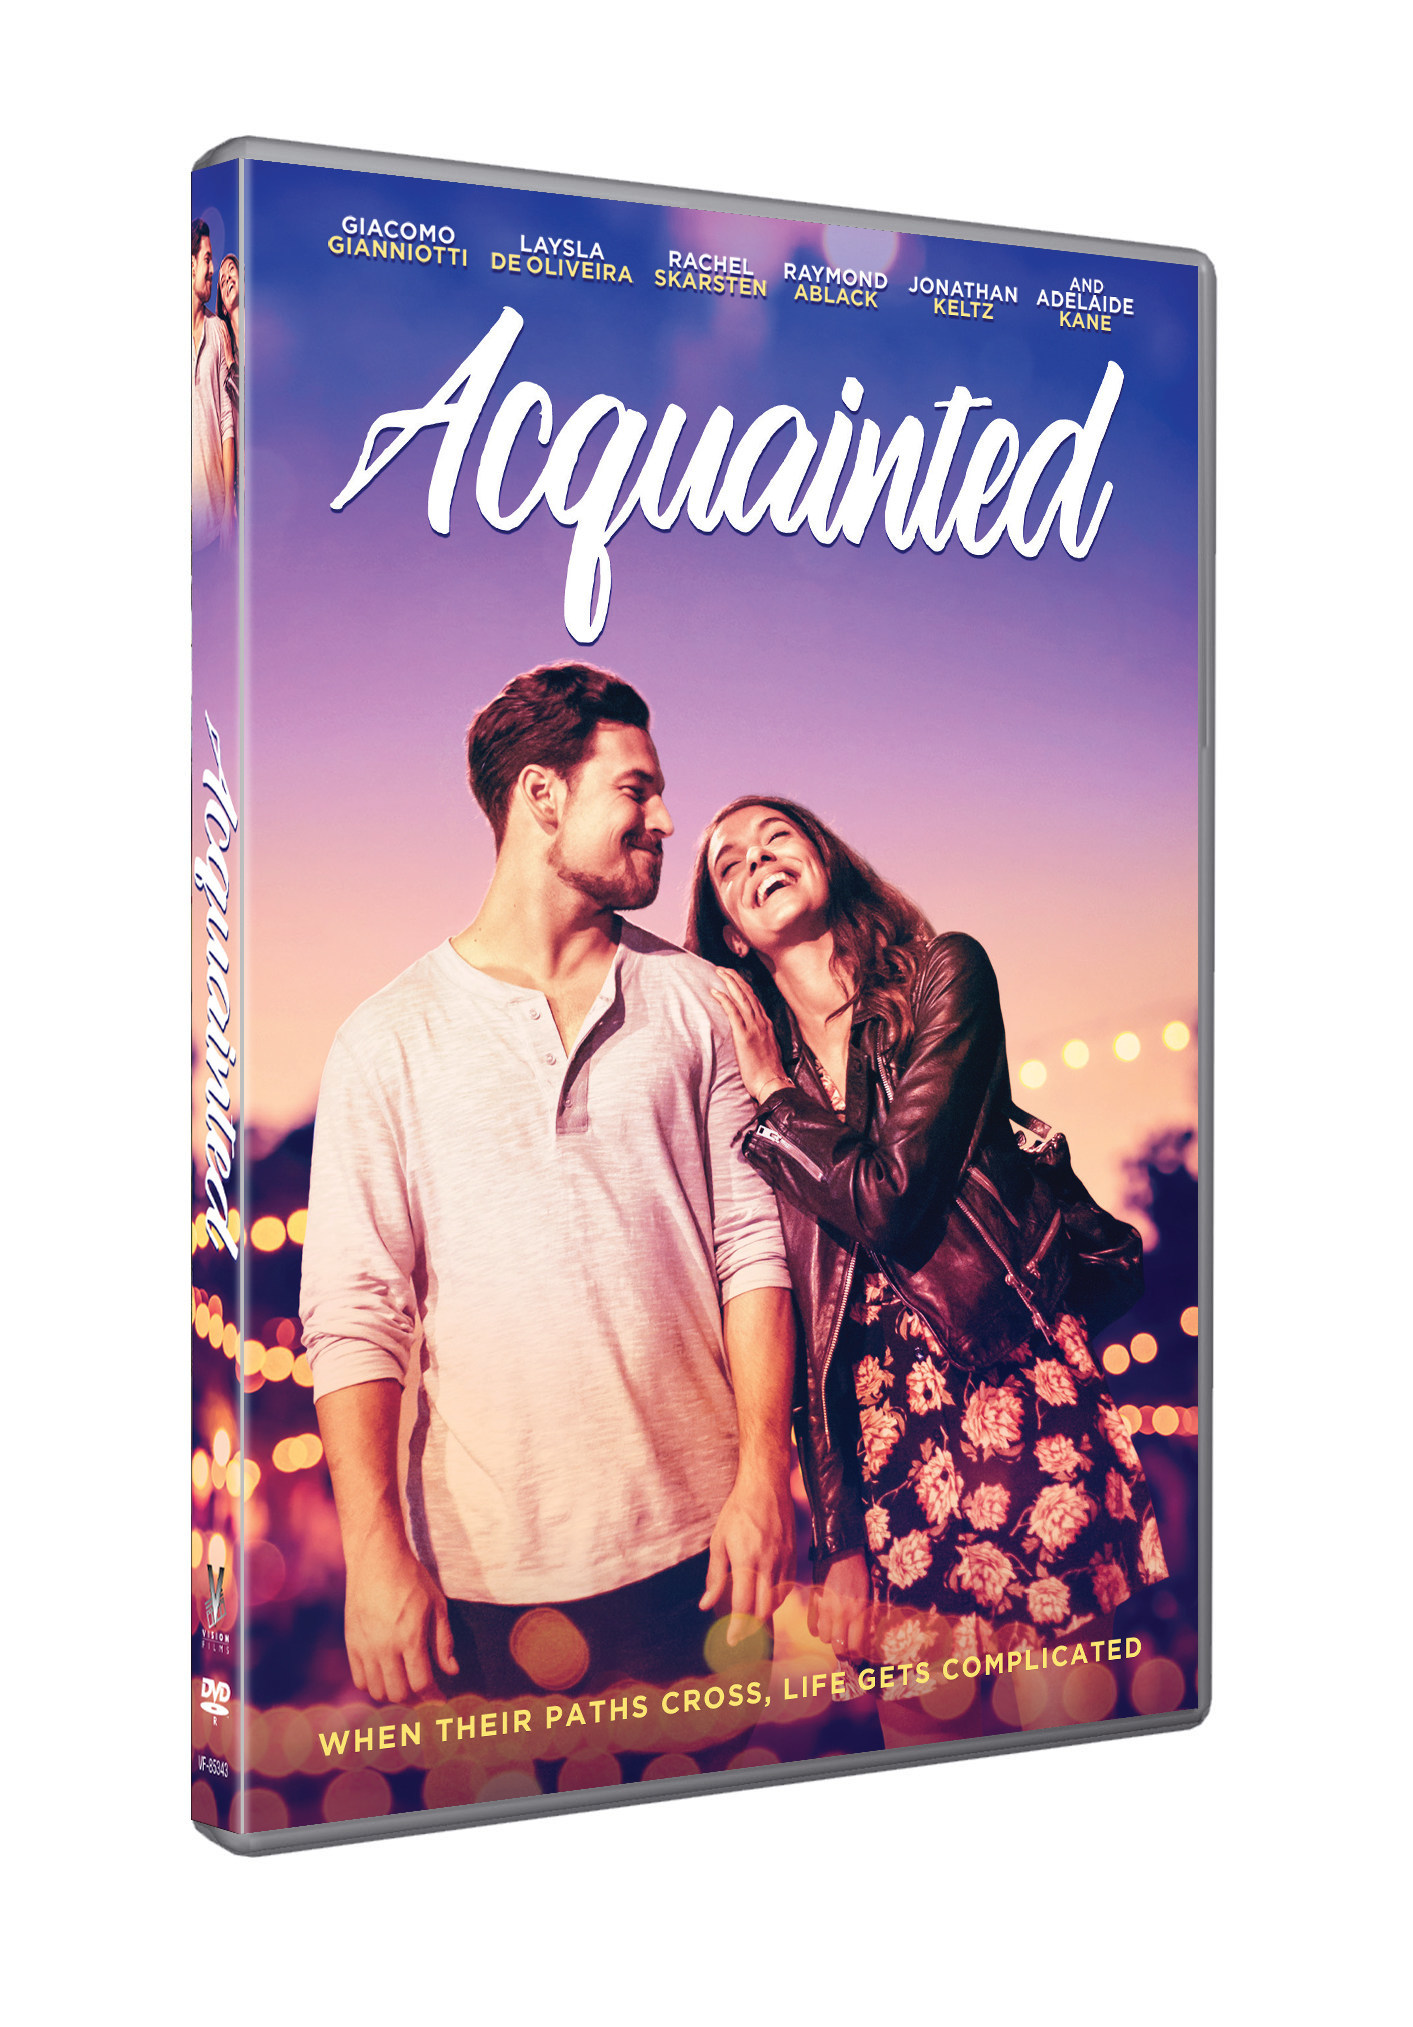 Modern Relationship Film Acquainted To Be Released By Vision Films